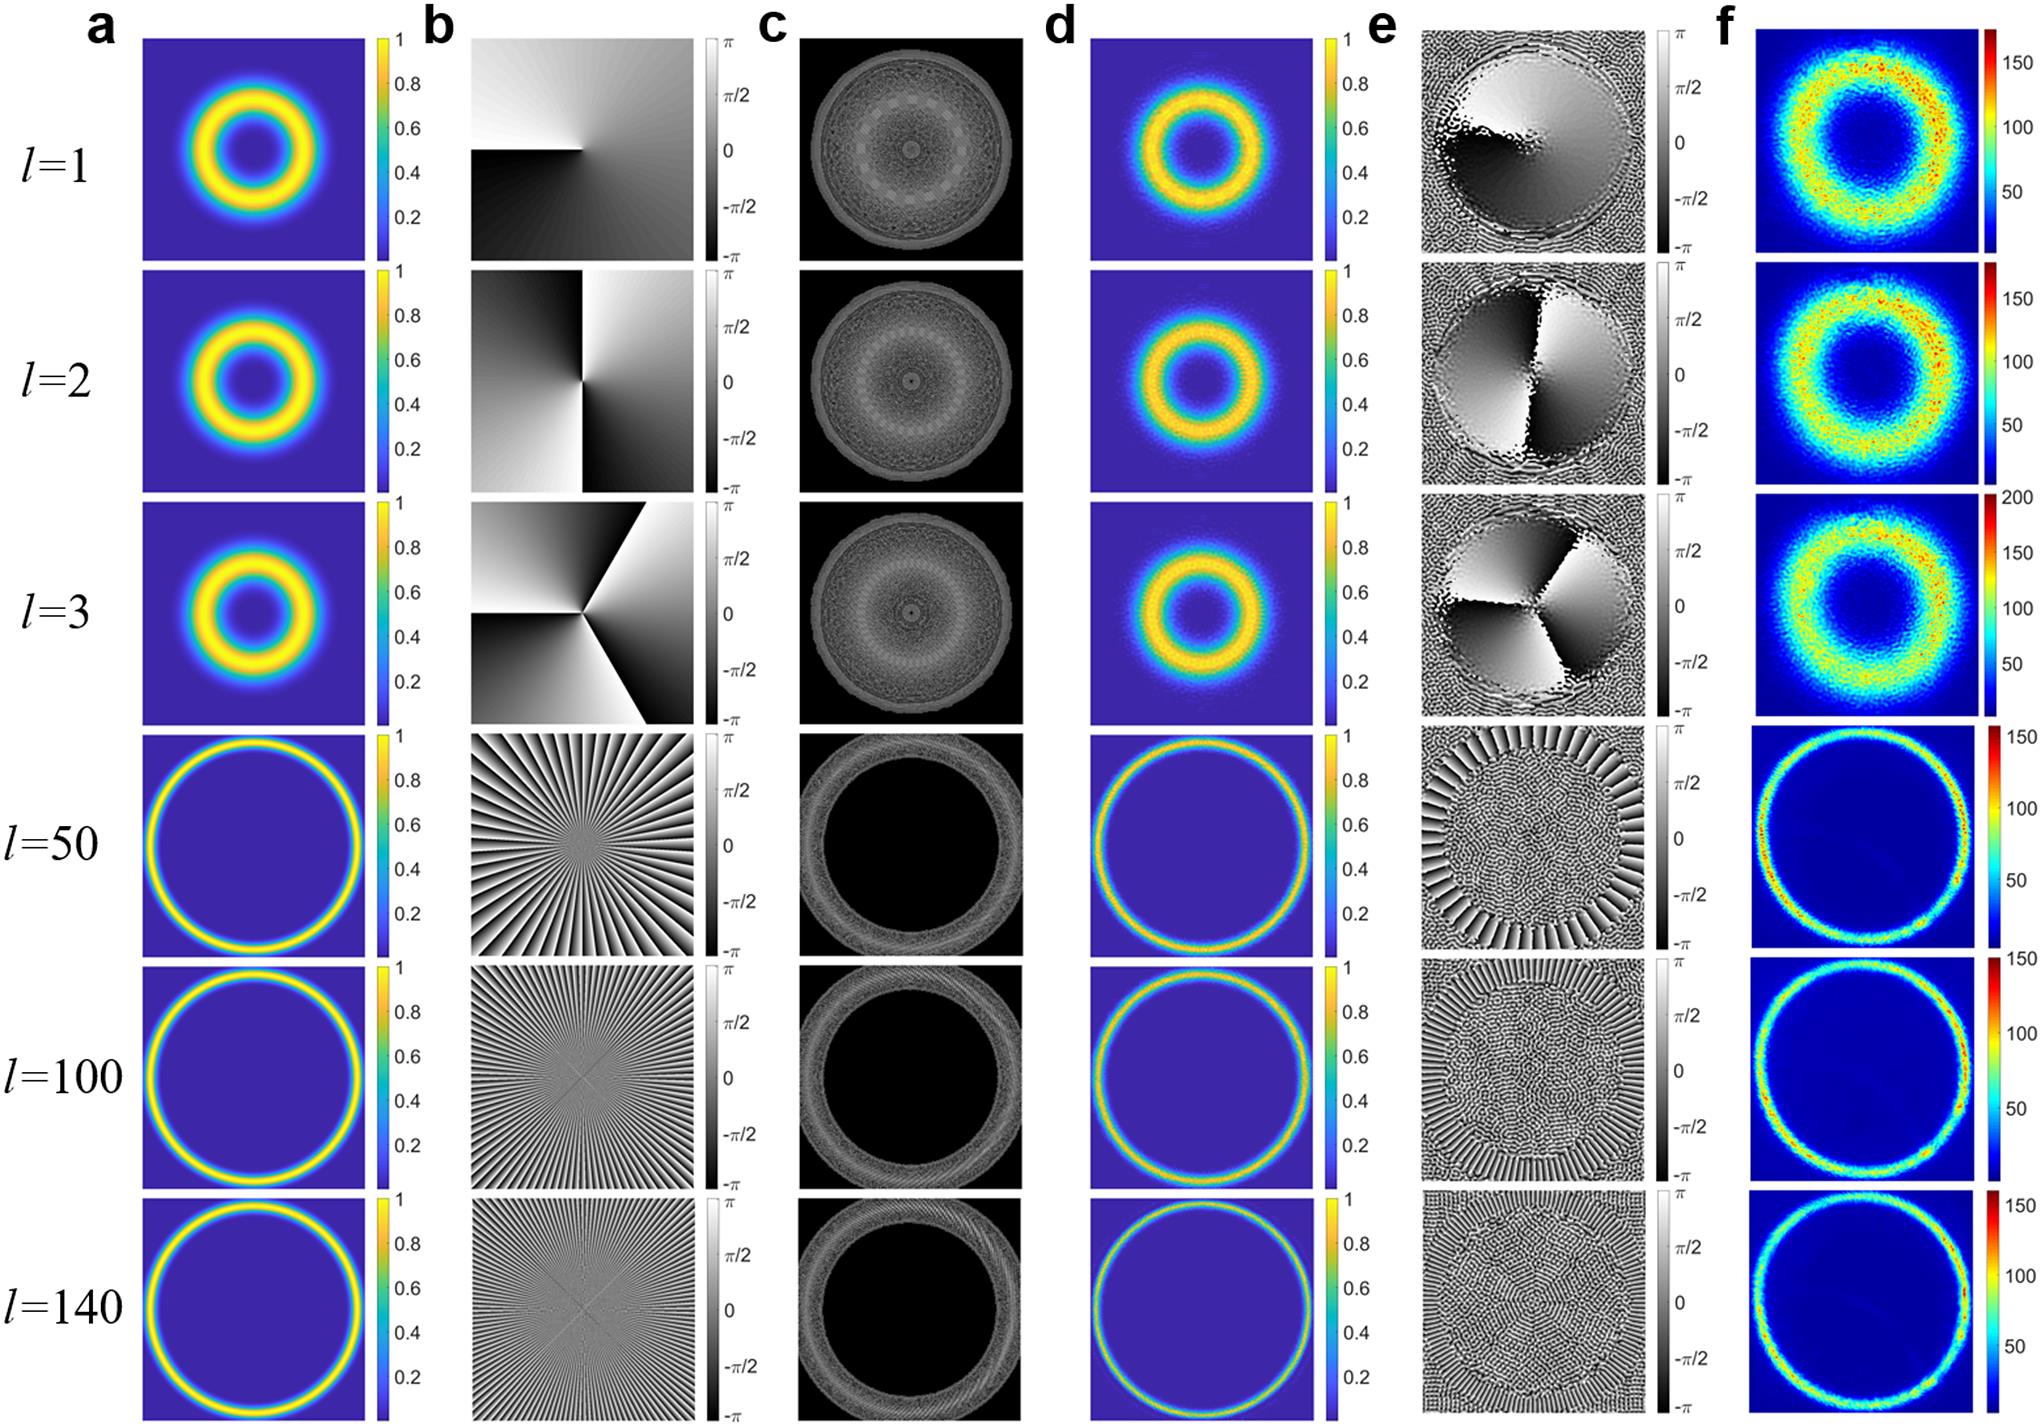 Generation of a PVB using super-pixel wavefront shaping. The target intensity (a) and phase (b) profiles of the PVBs. (c) Binary DMD patterns. Theoretical intensity (d) and phase (e) profiles of the output using super-pixel wavefront shaping. (f) Experimentally measured intensity profiles.